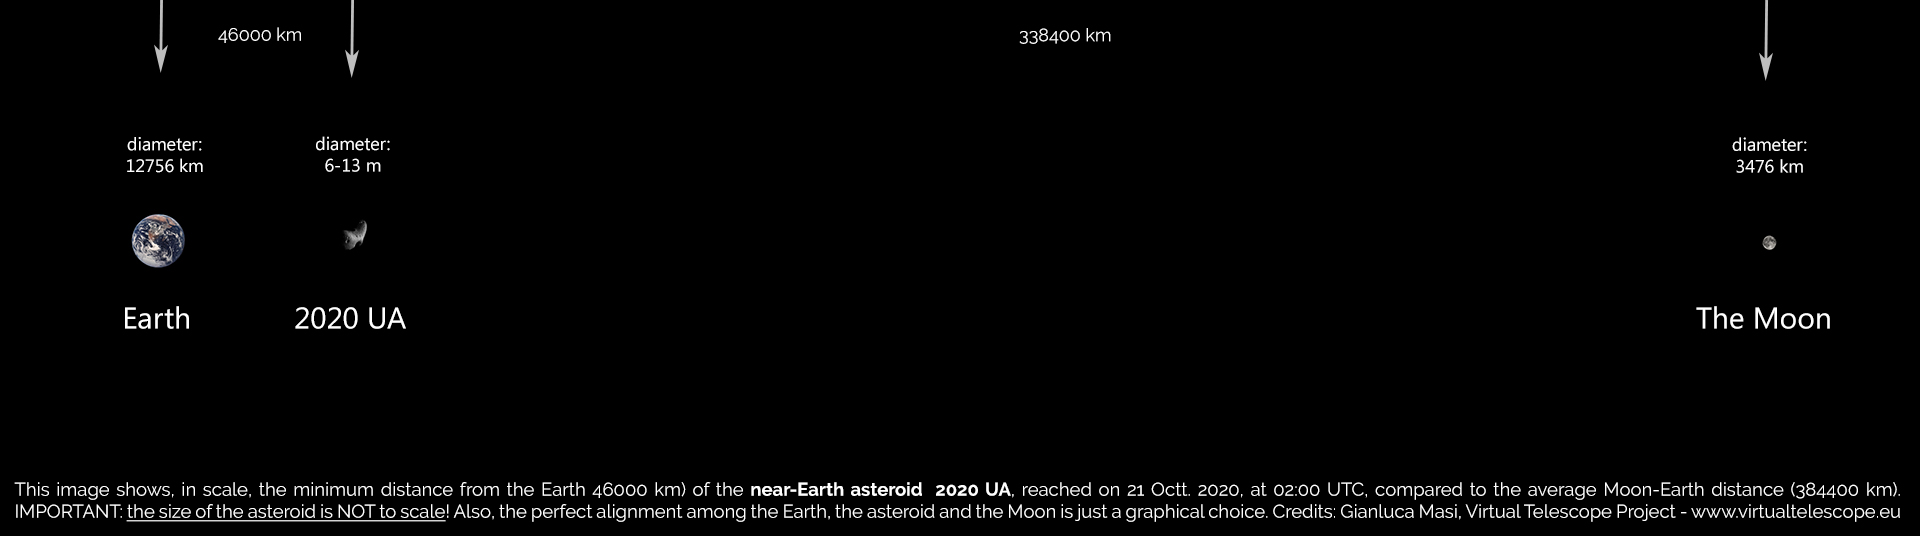 The Earth-2020 UA distance, in scale with the Earth-Moon one.